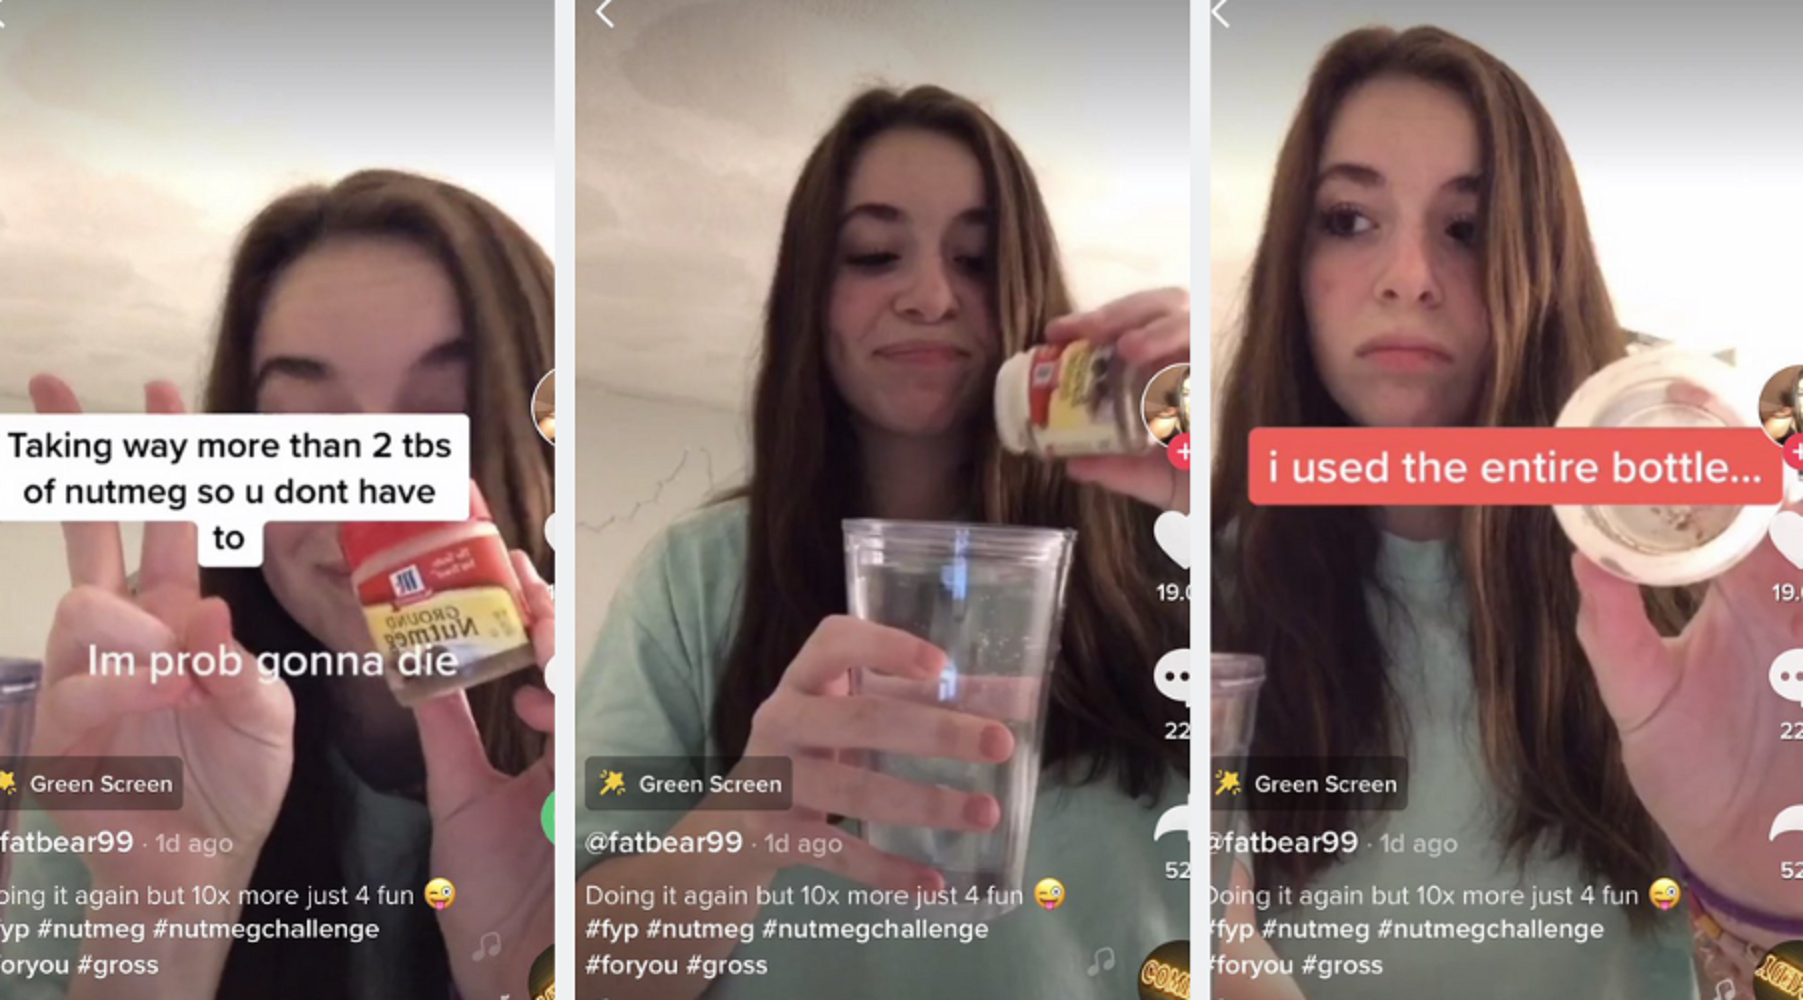 TikTok Launches Global Report into the Impact of Potentially Harmful Challenges and Hoaxes